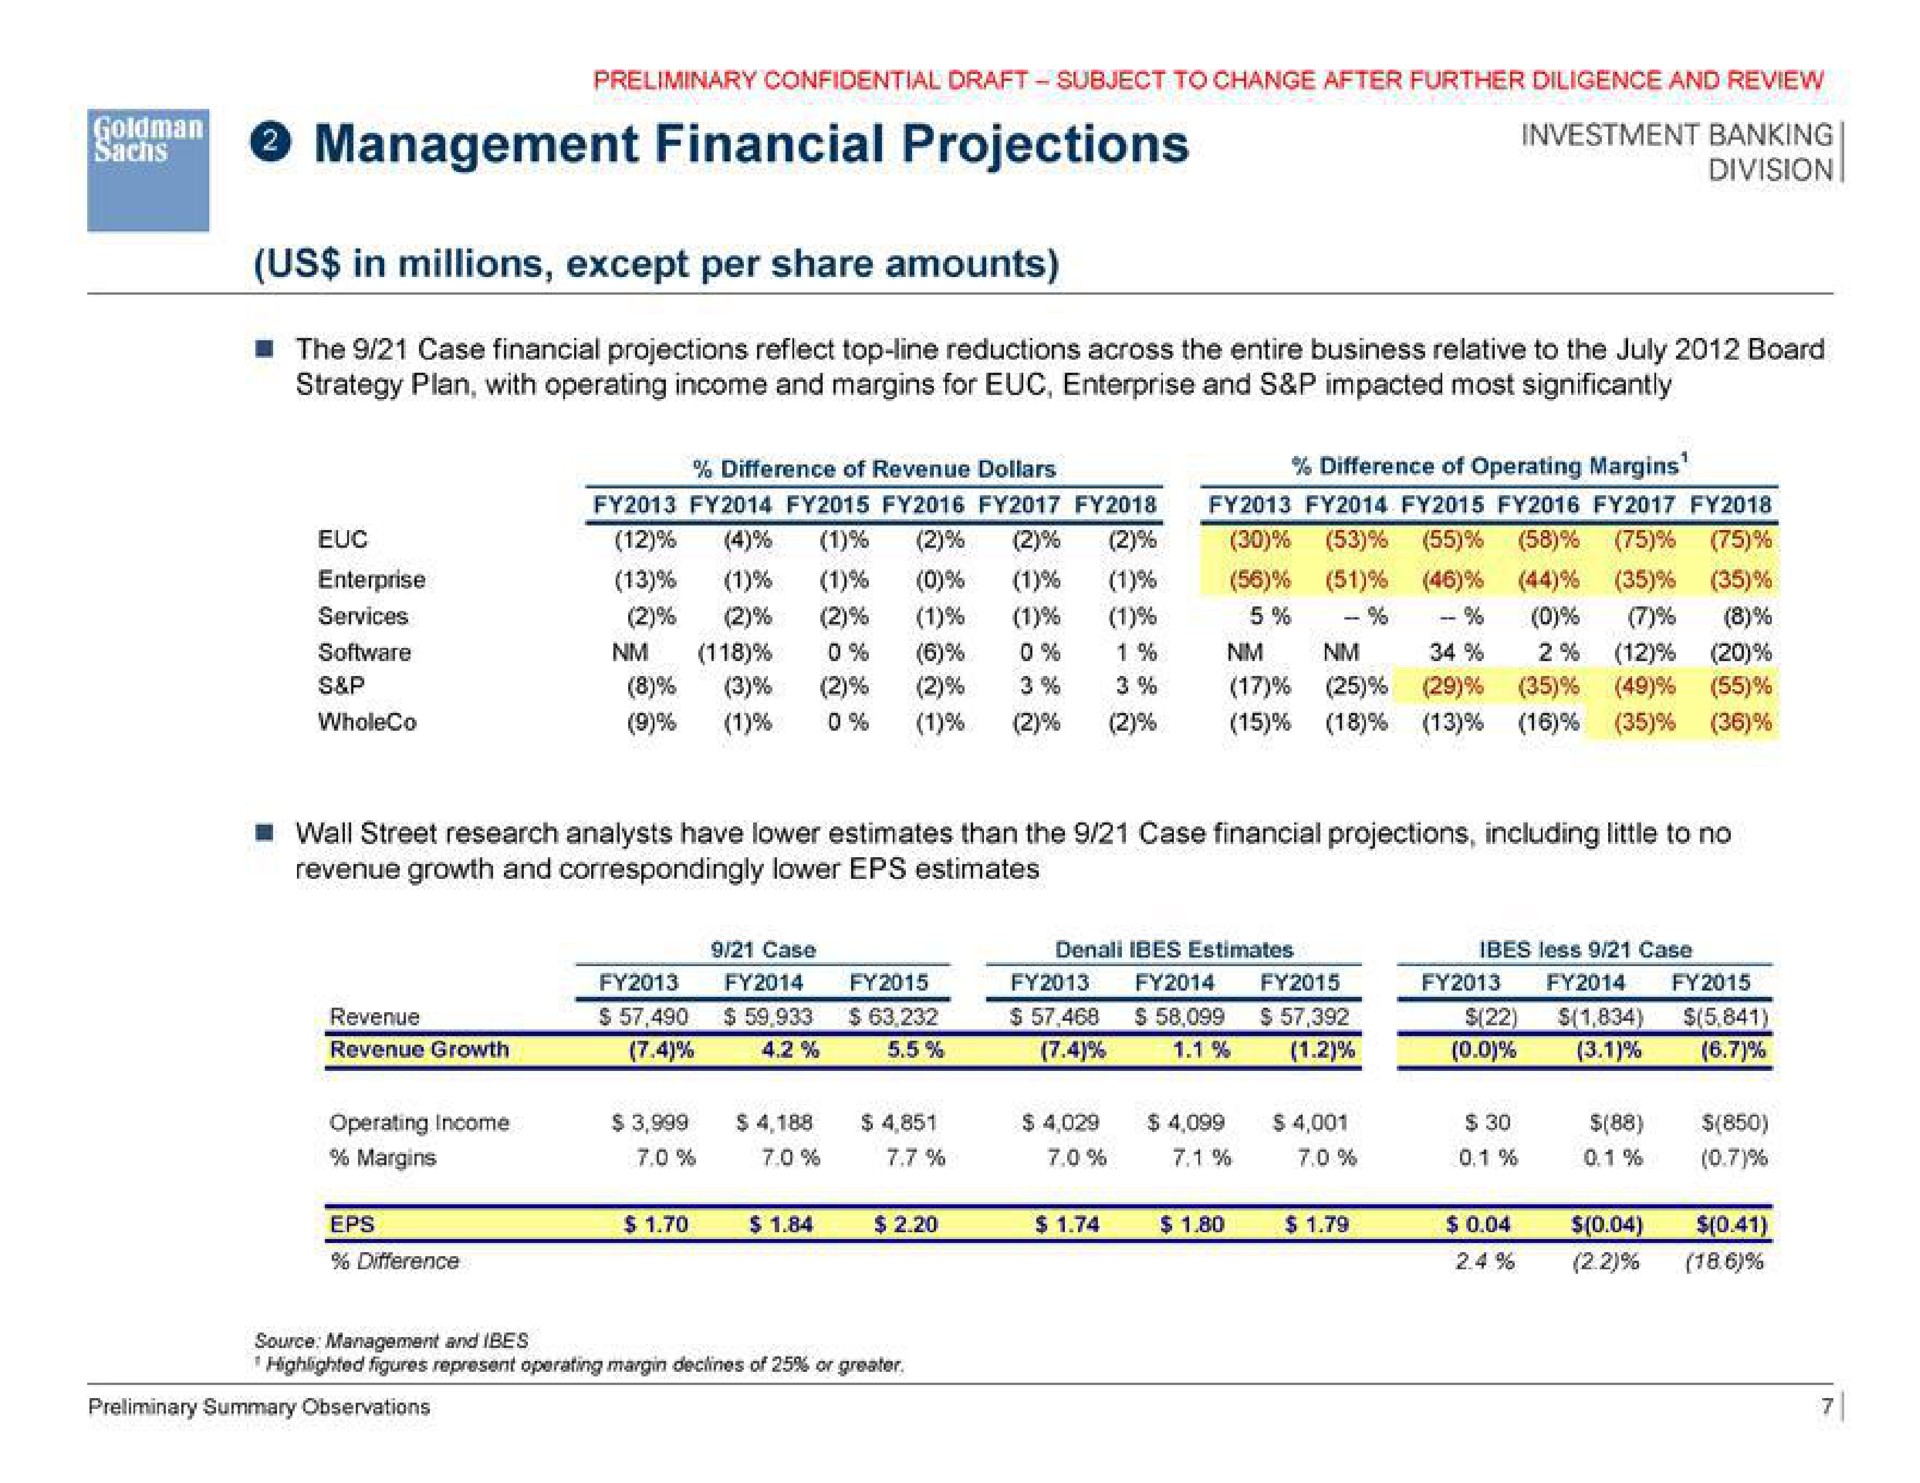 management financial projections us in millions except per share amounts | Goldman Sachs